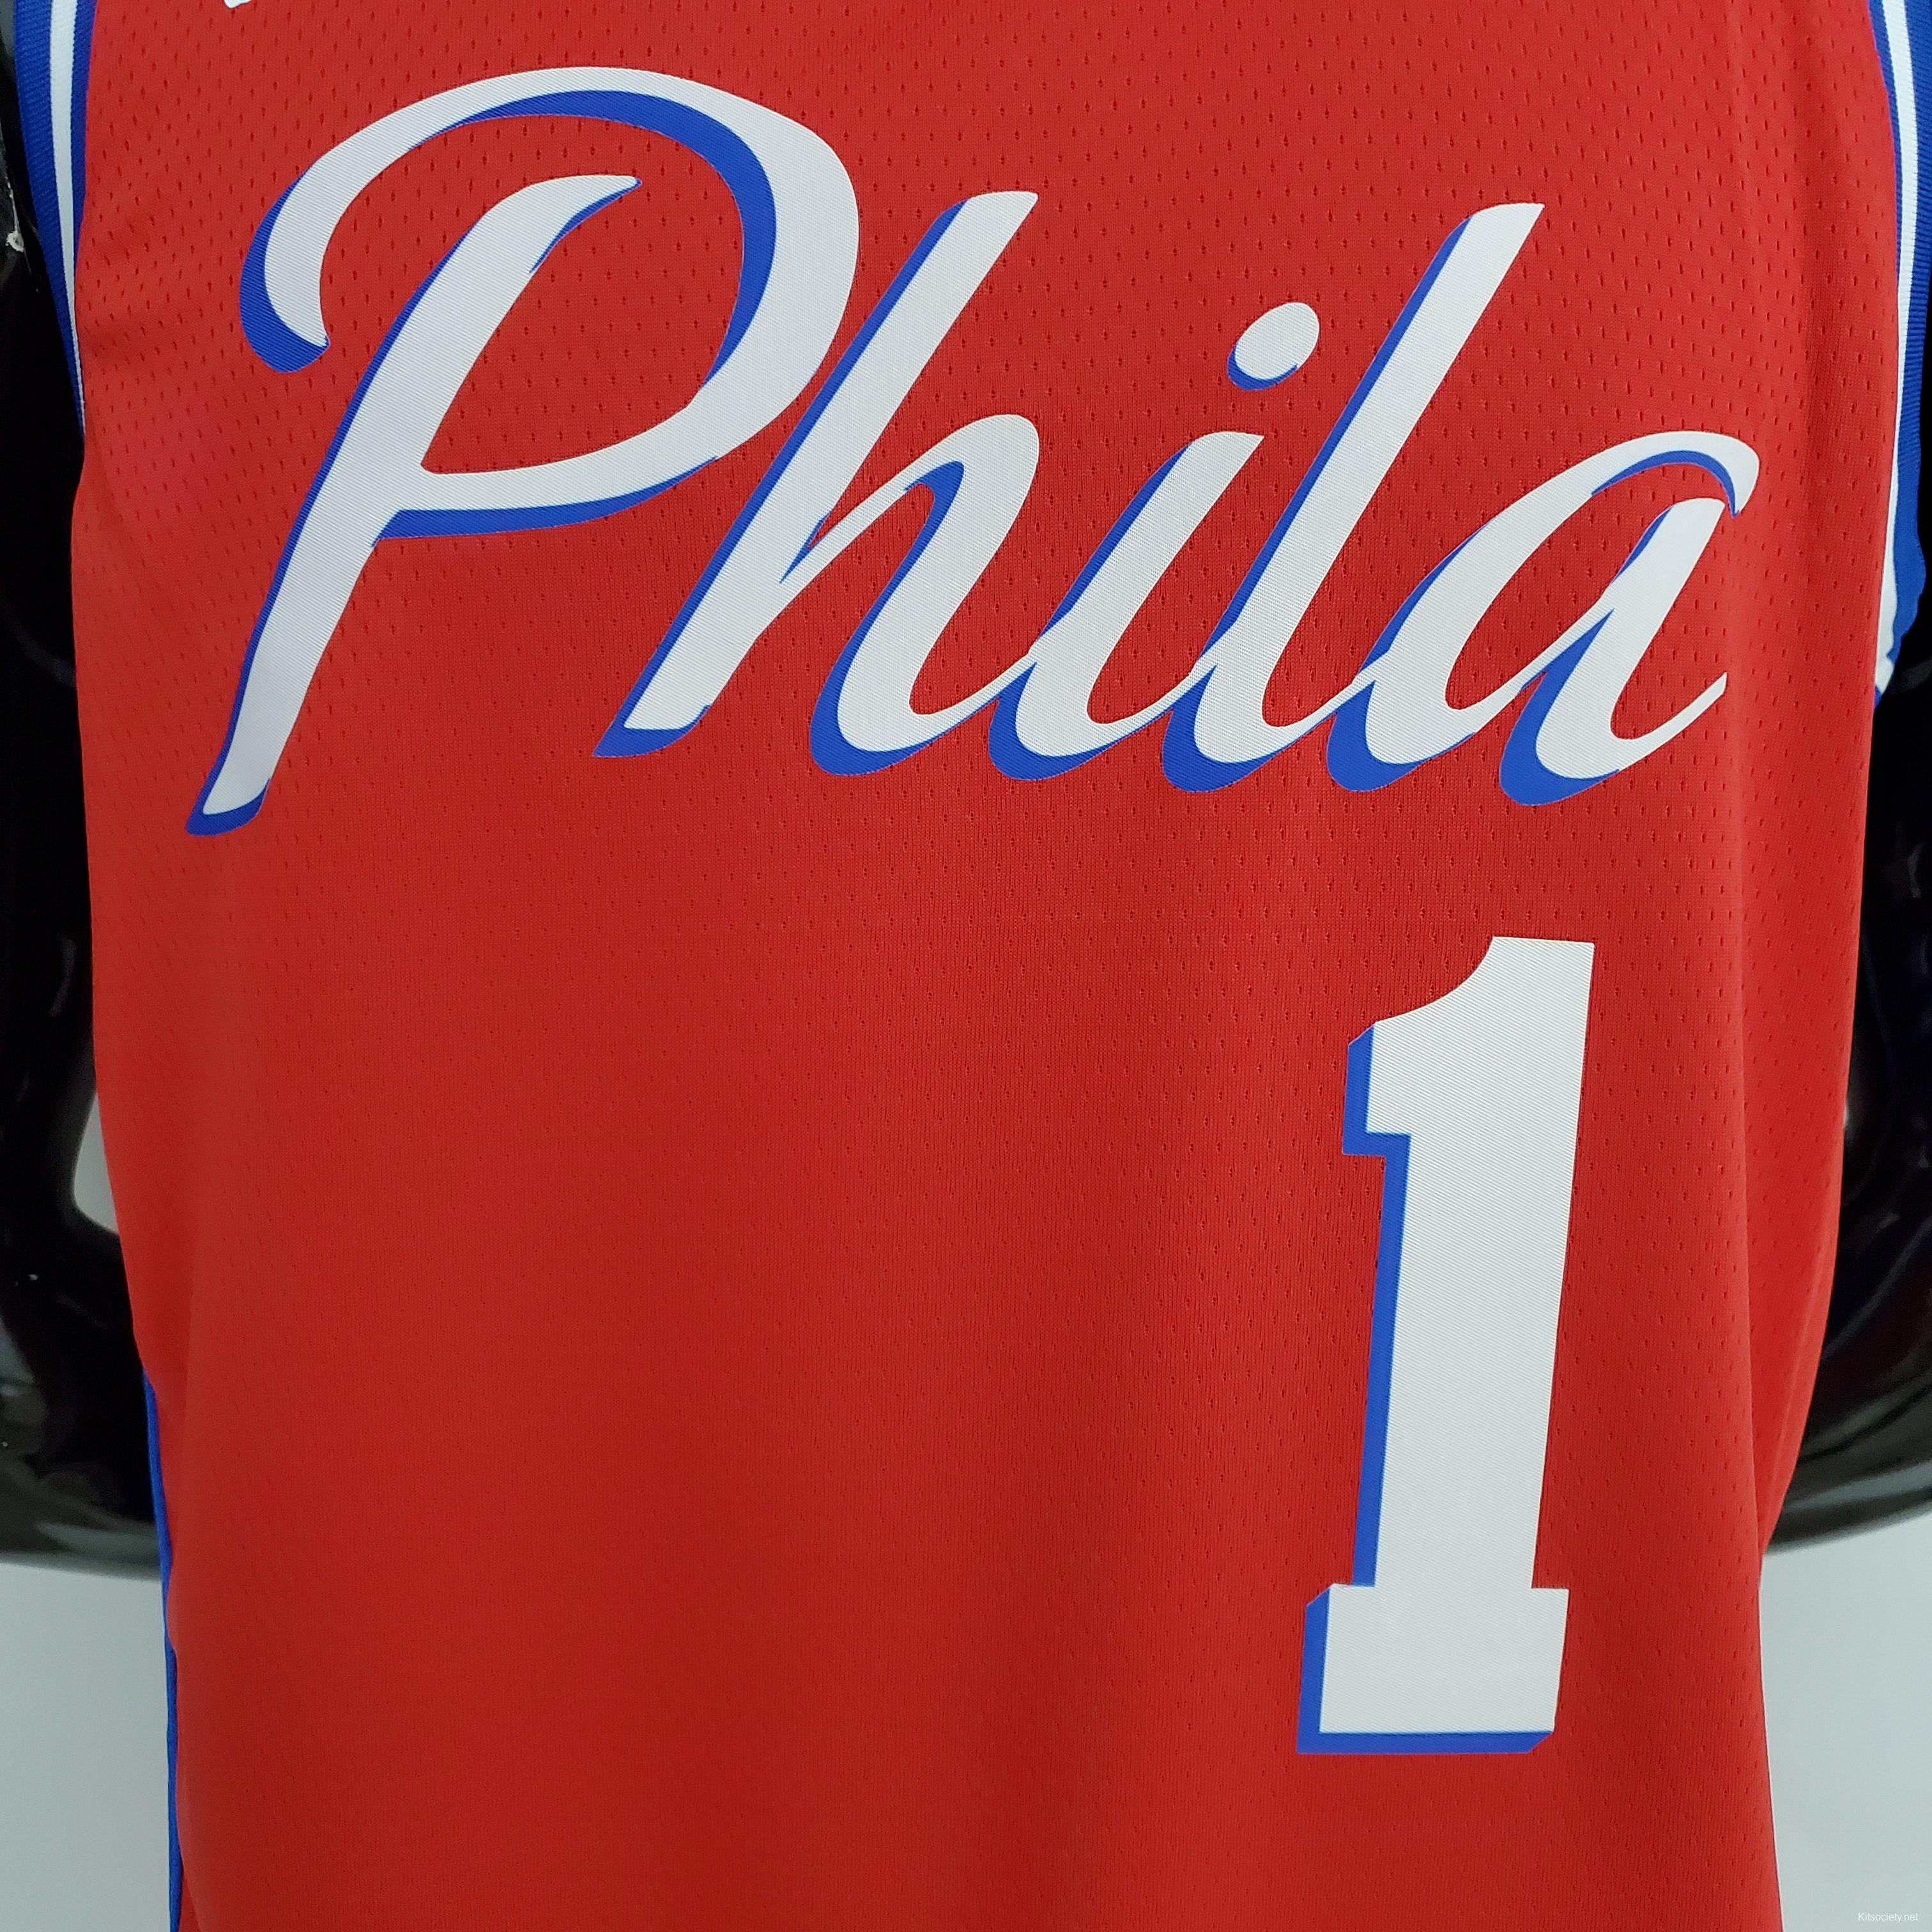 sixers red jersey